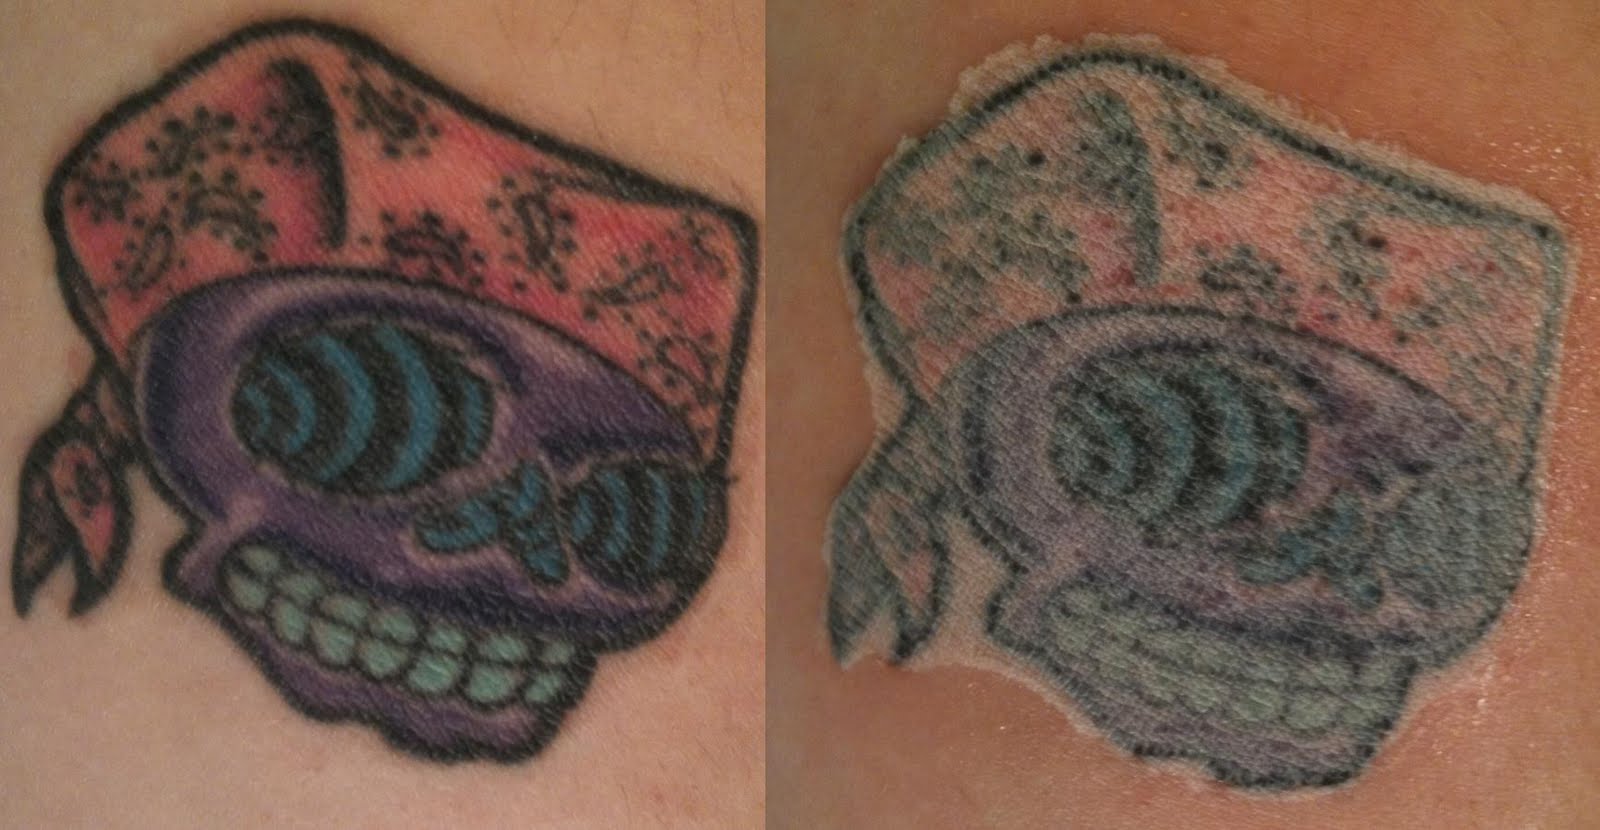 TCA Tattoo Removal Before and After